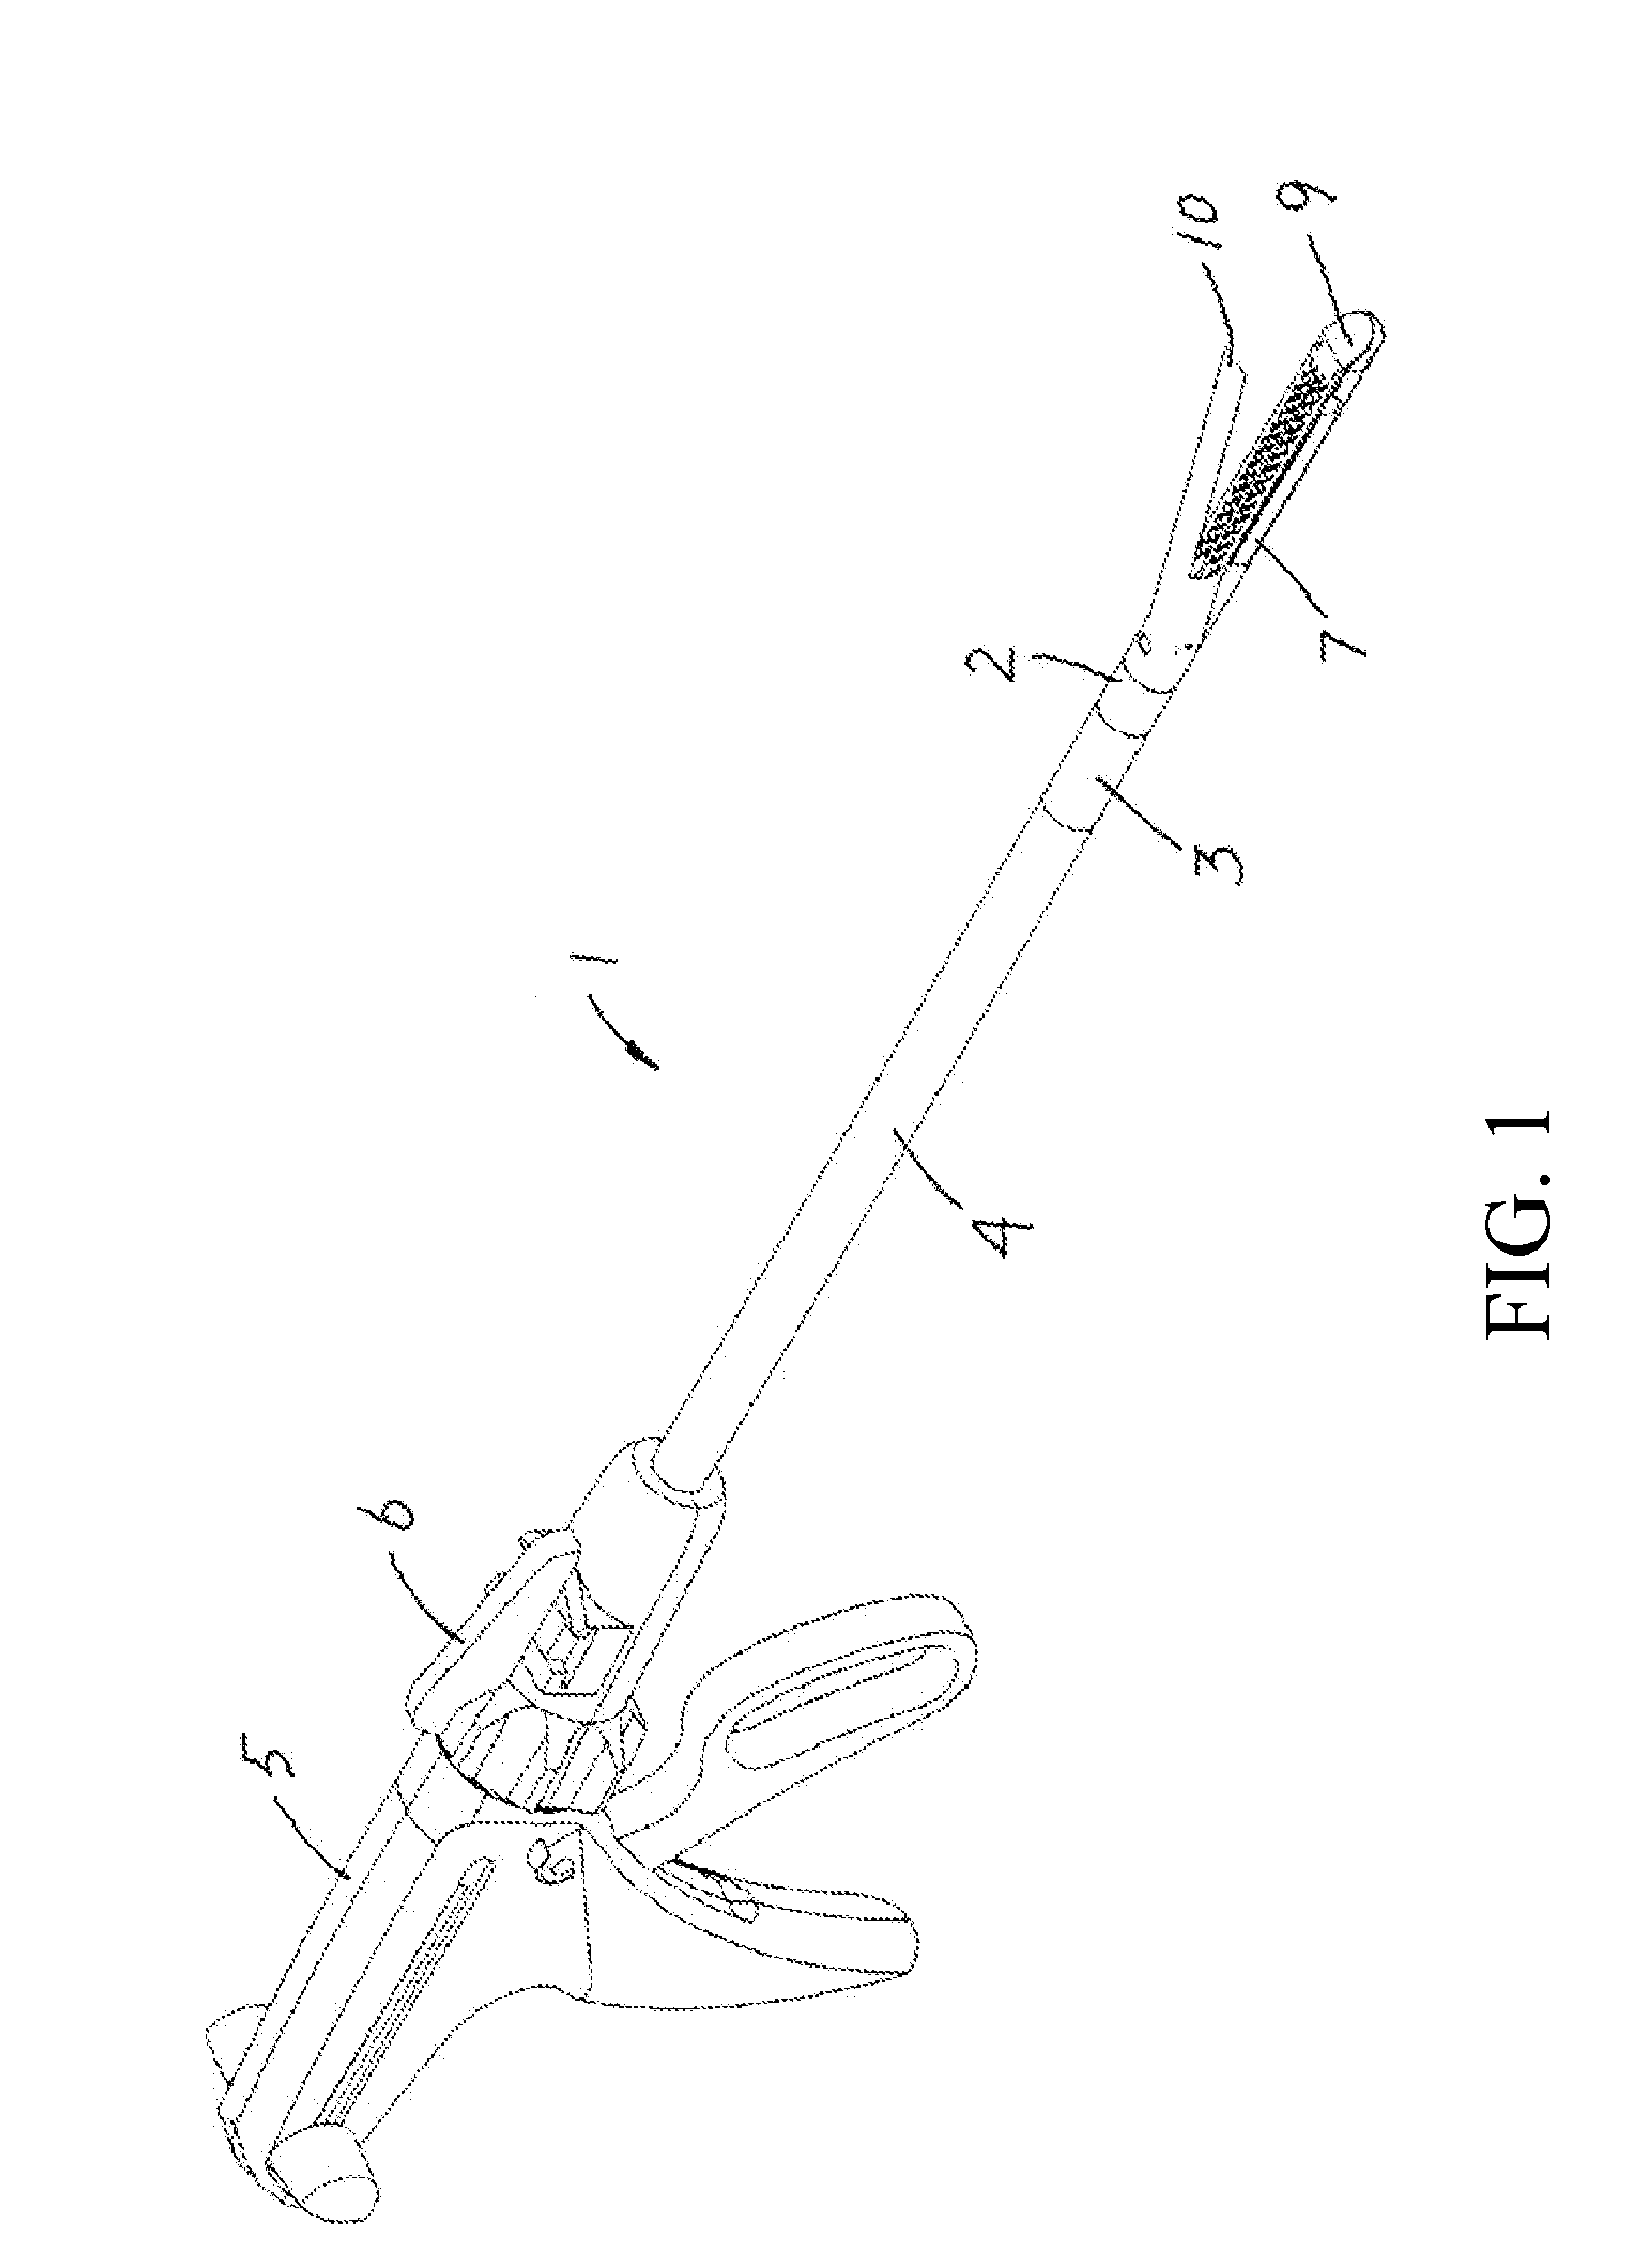 Endoscopic surgical cutting stapler with a chain articulation